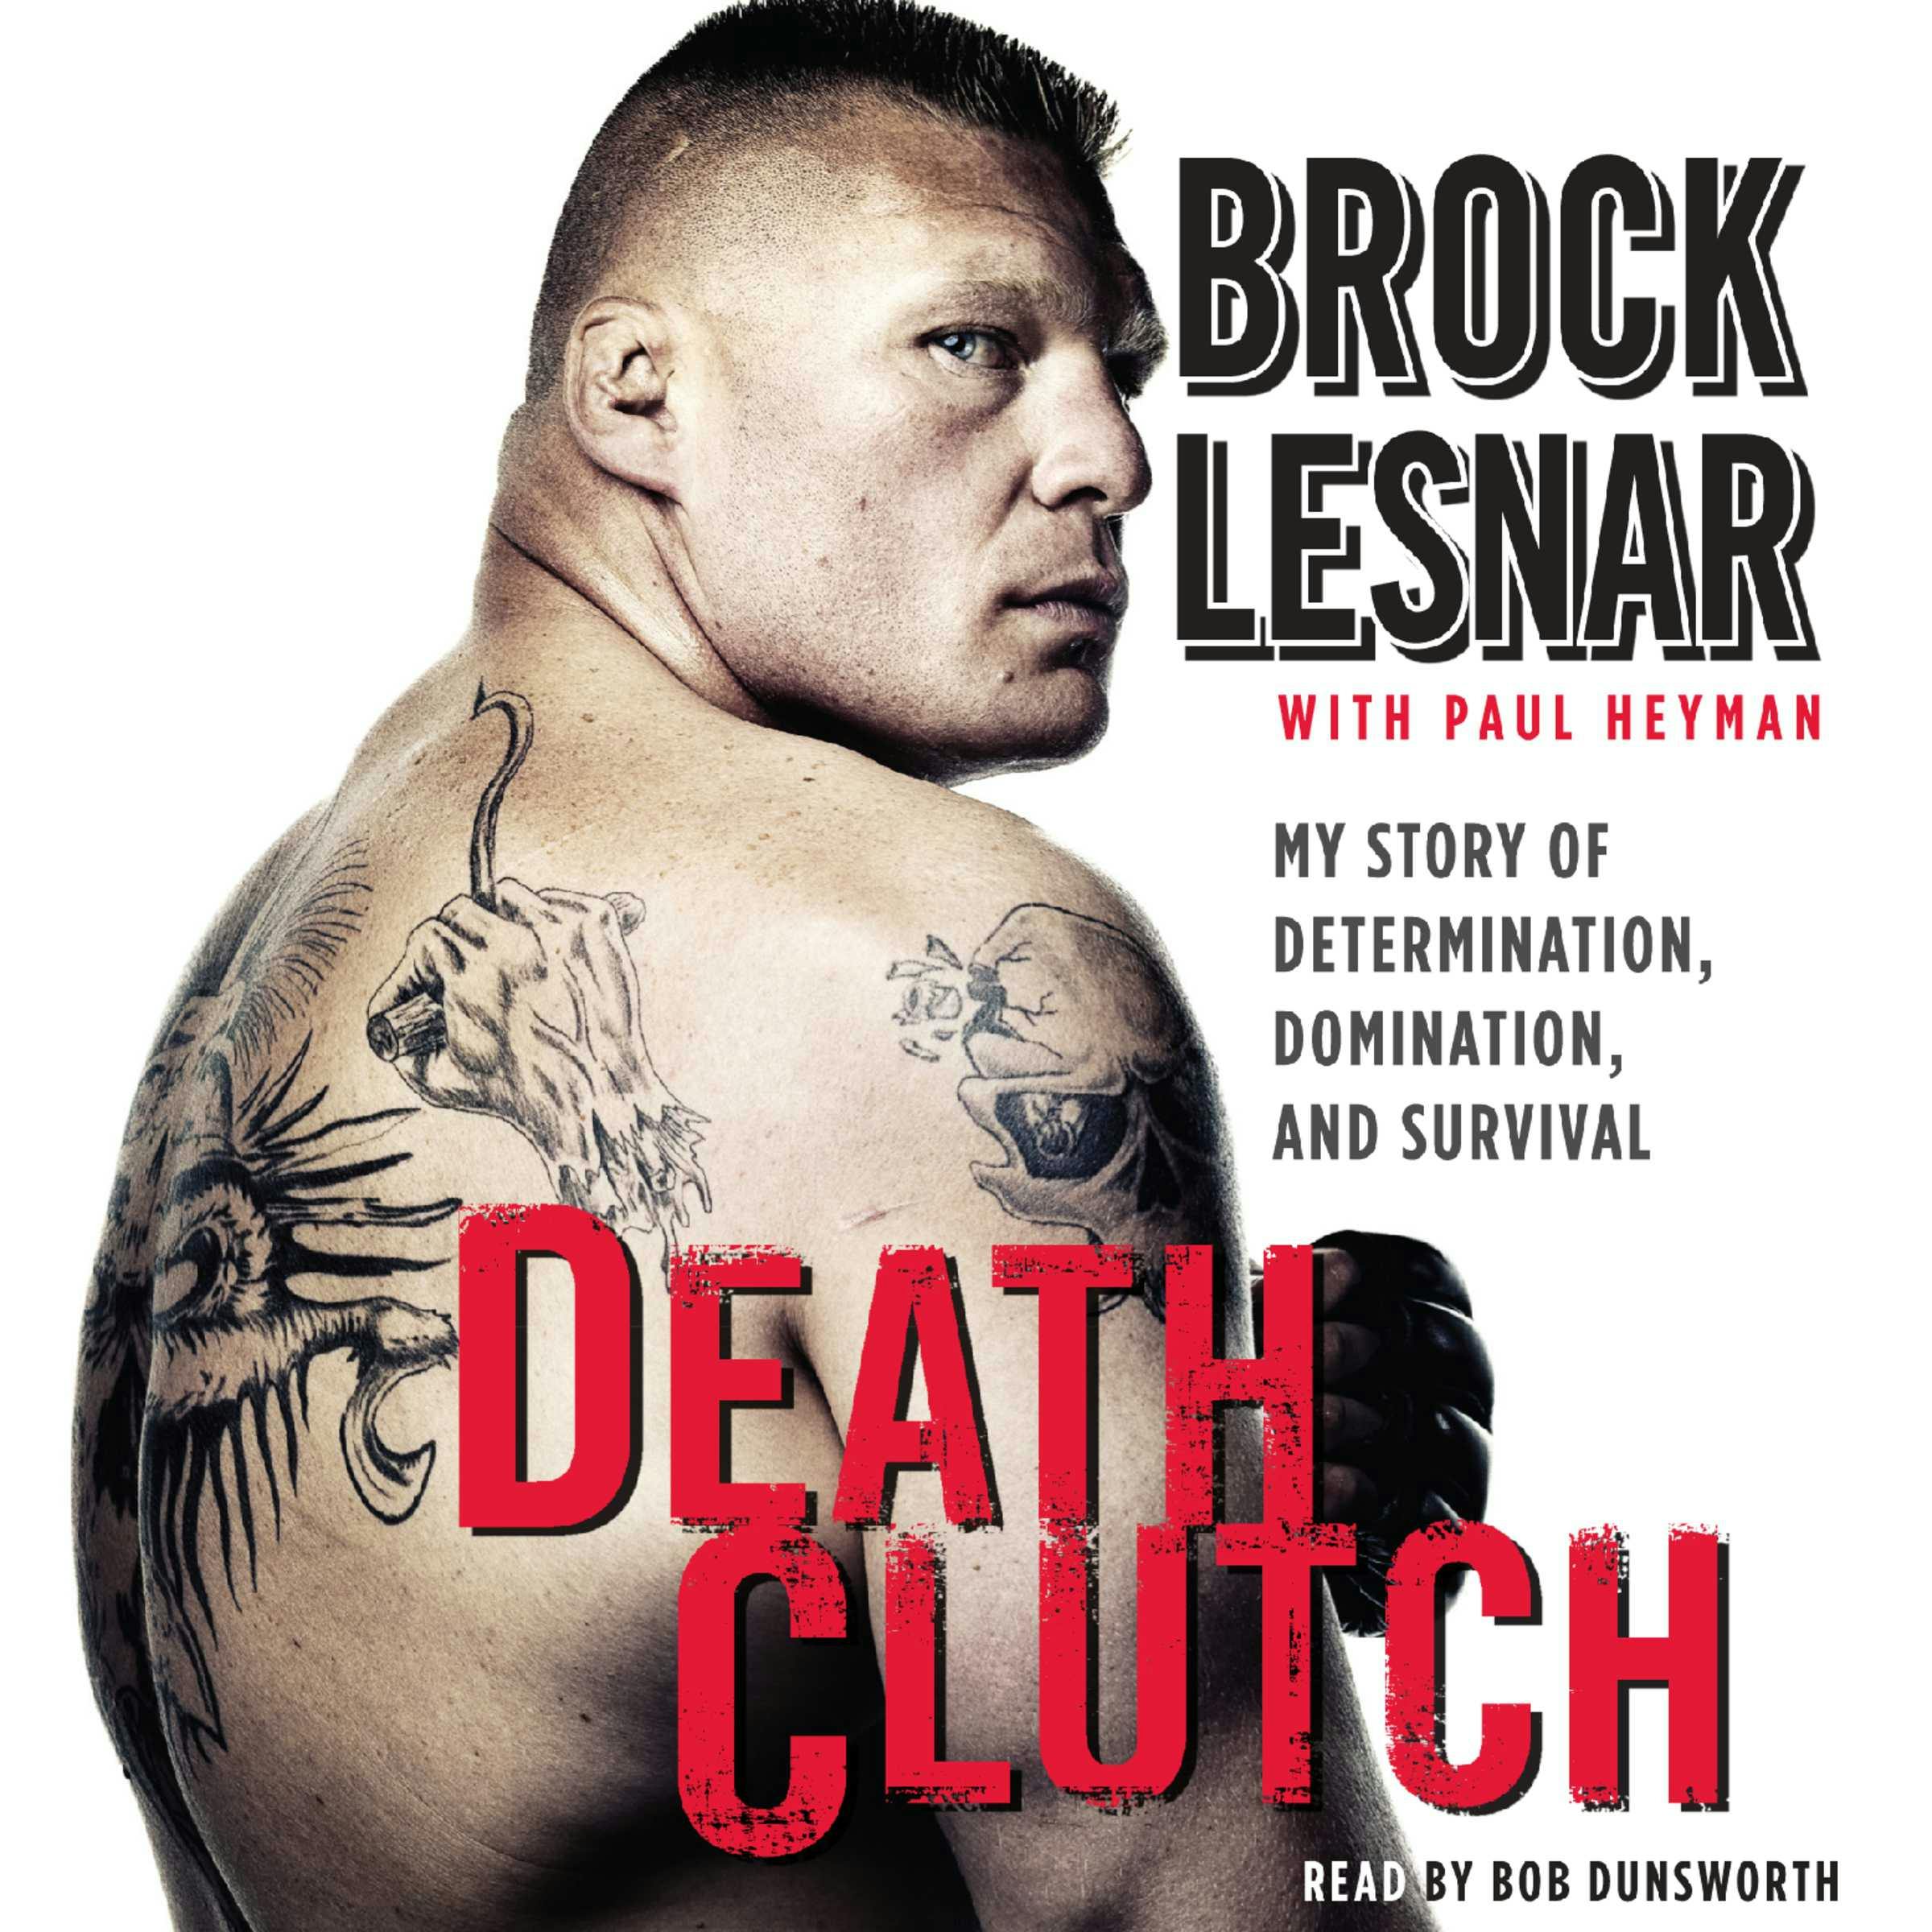 Death Clutch: My Story of Determination, Domination, and Survival - Brock Lesnar